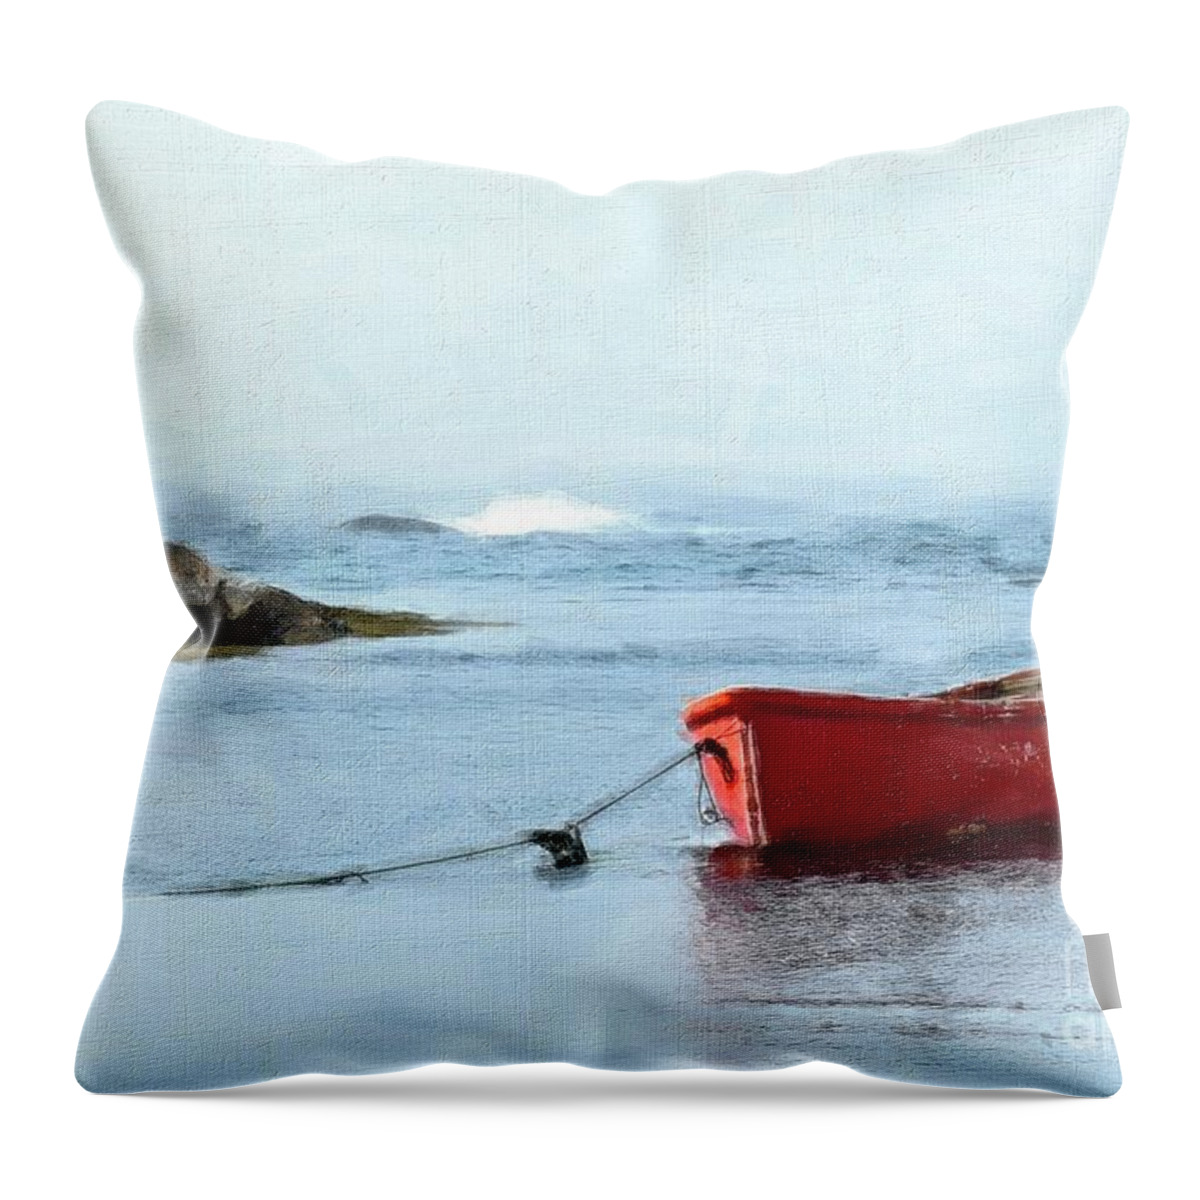 Red Throw Pillow featuring the painting Red Boat by Tammy Lee Bradley